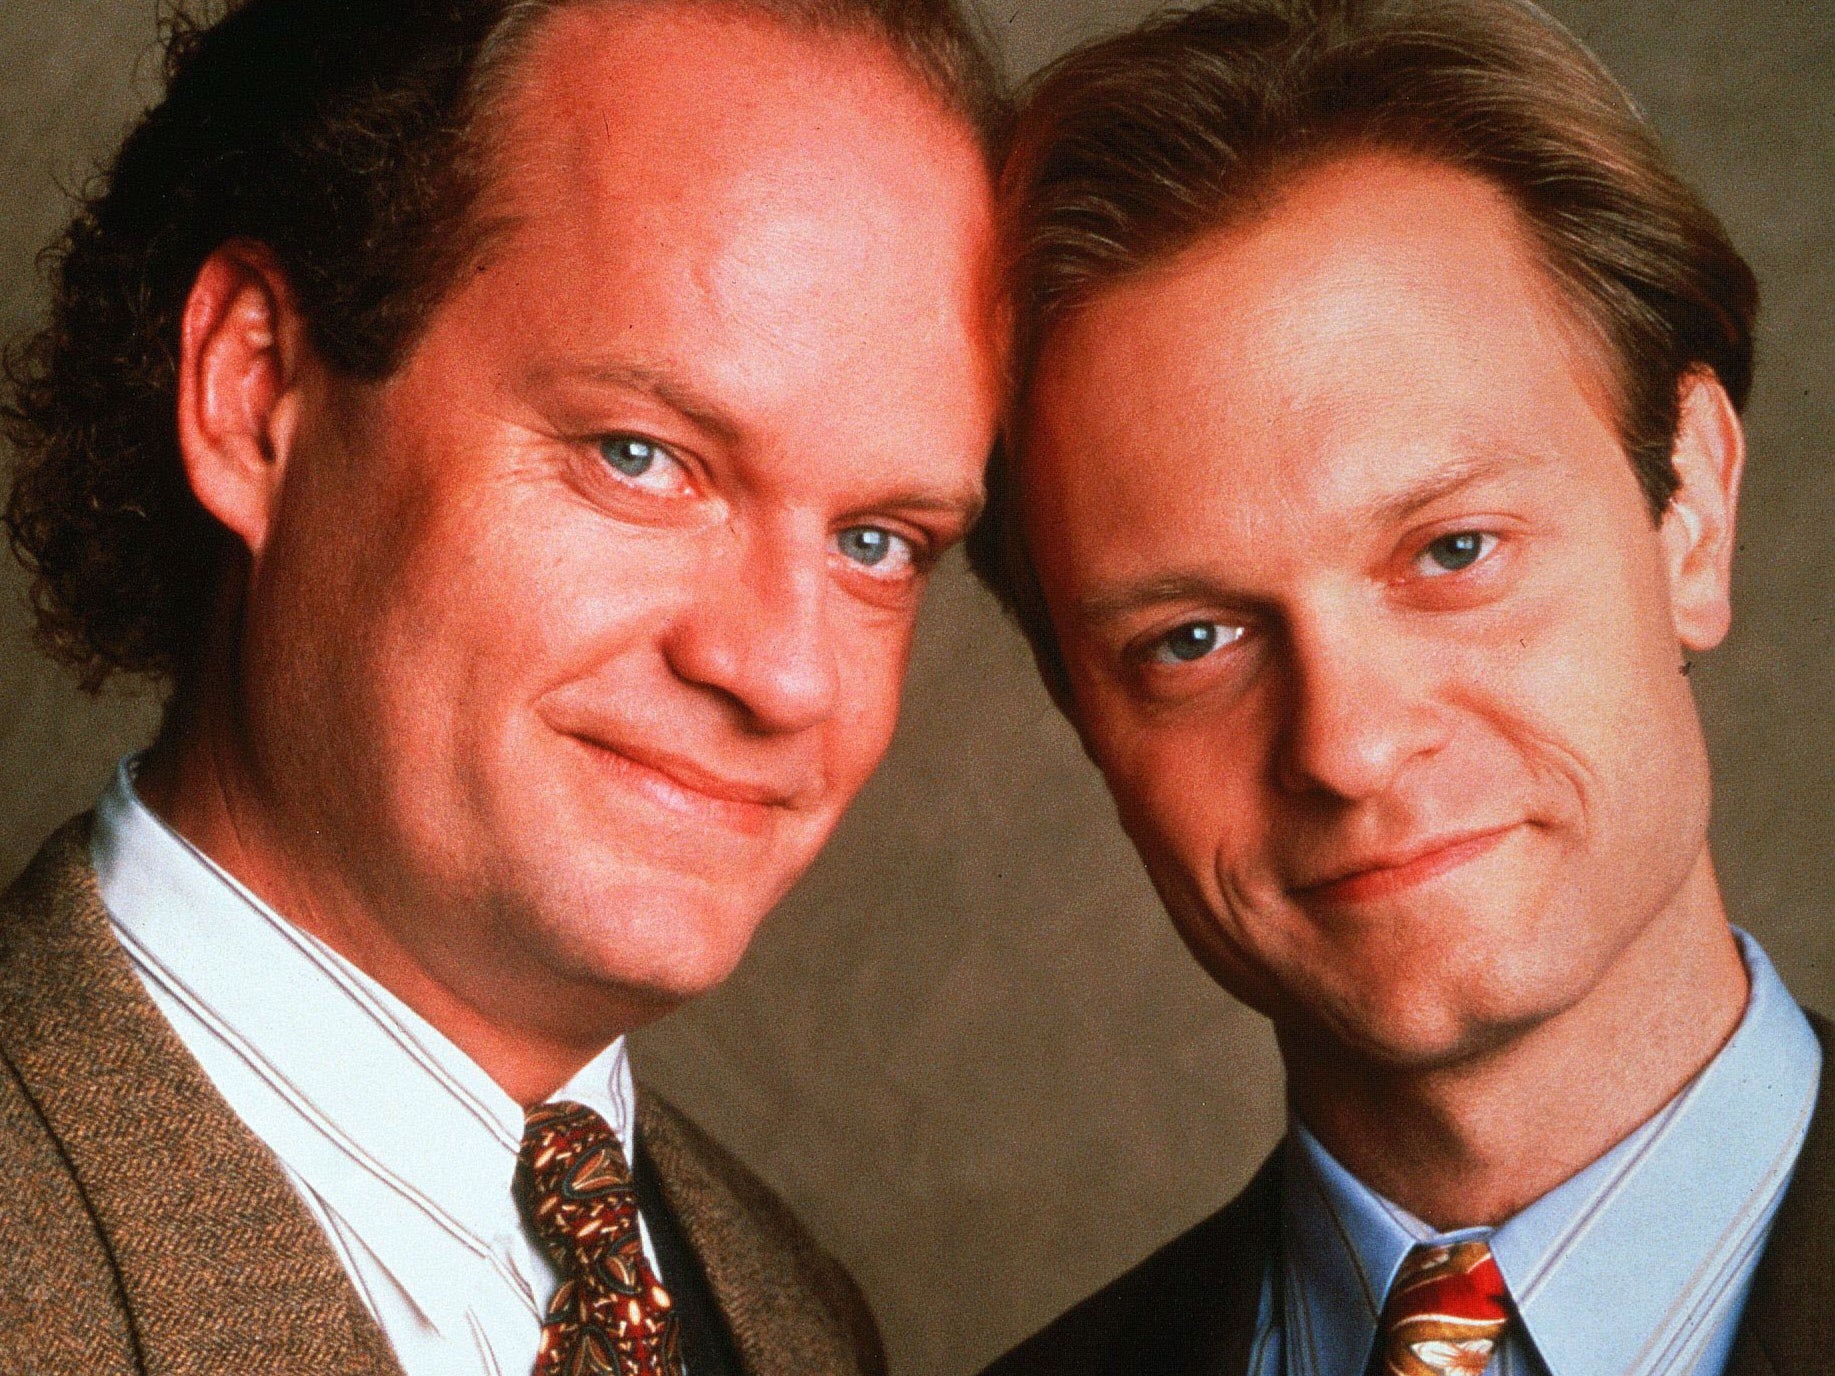 The brothers Crane starred in the original Frasier for 11 seasons